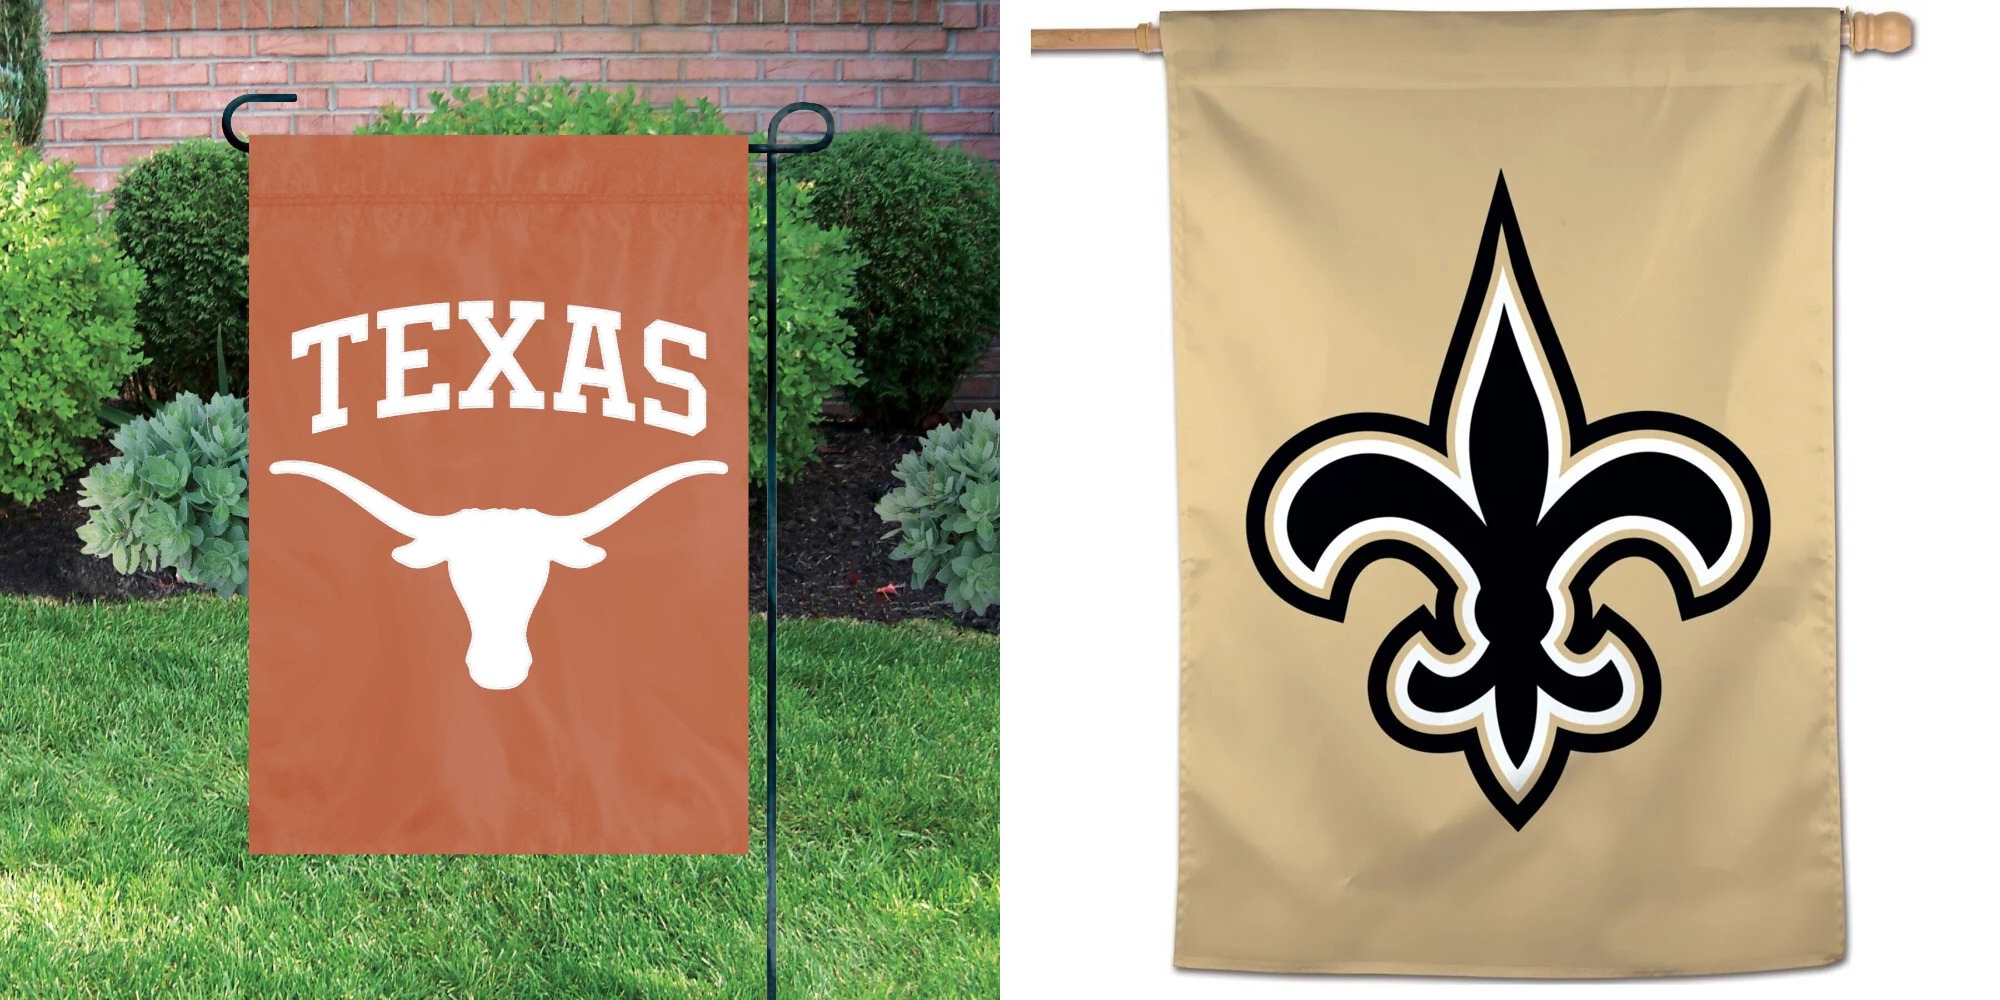 Breaking news: Texas valuable player agree terms with Saints